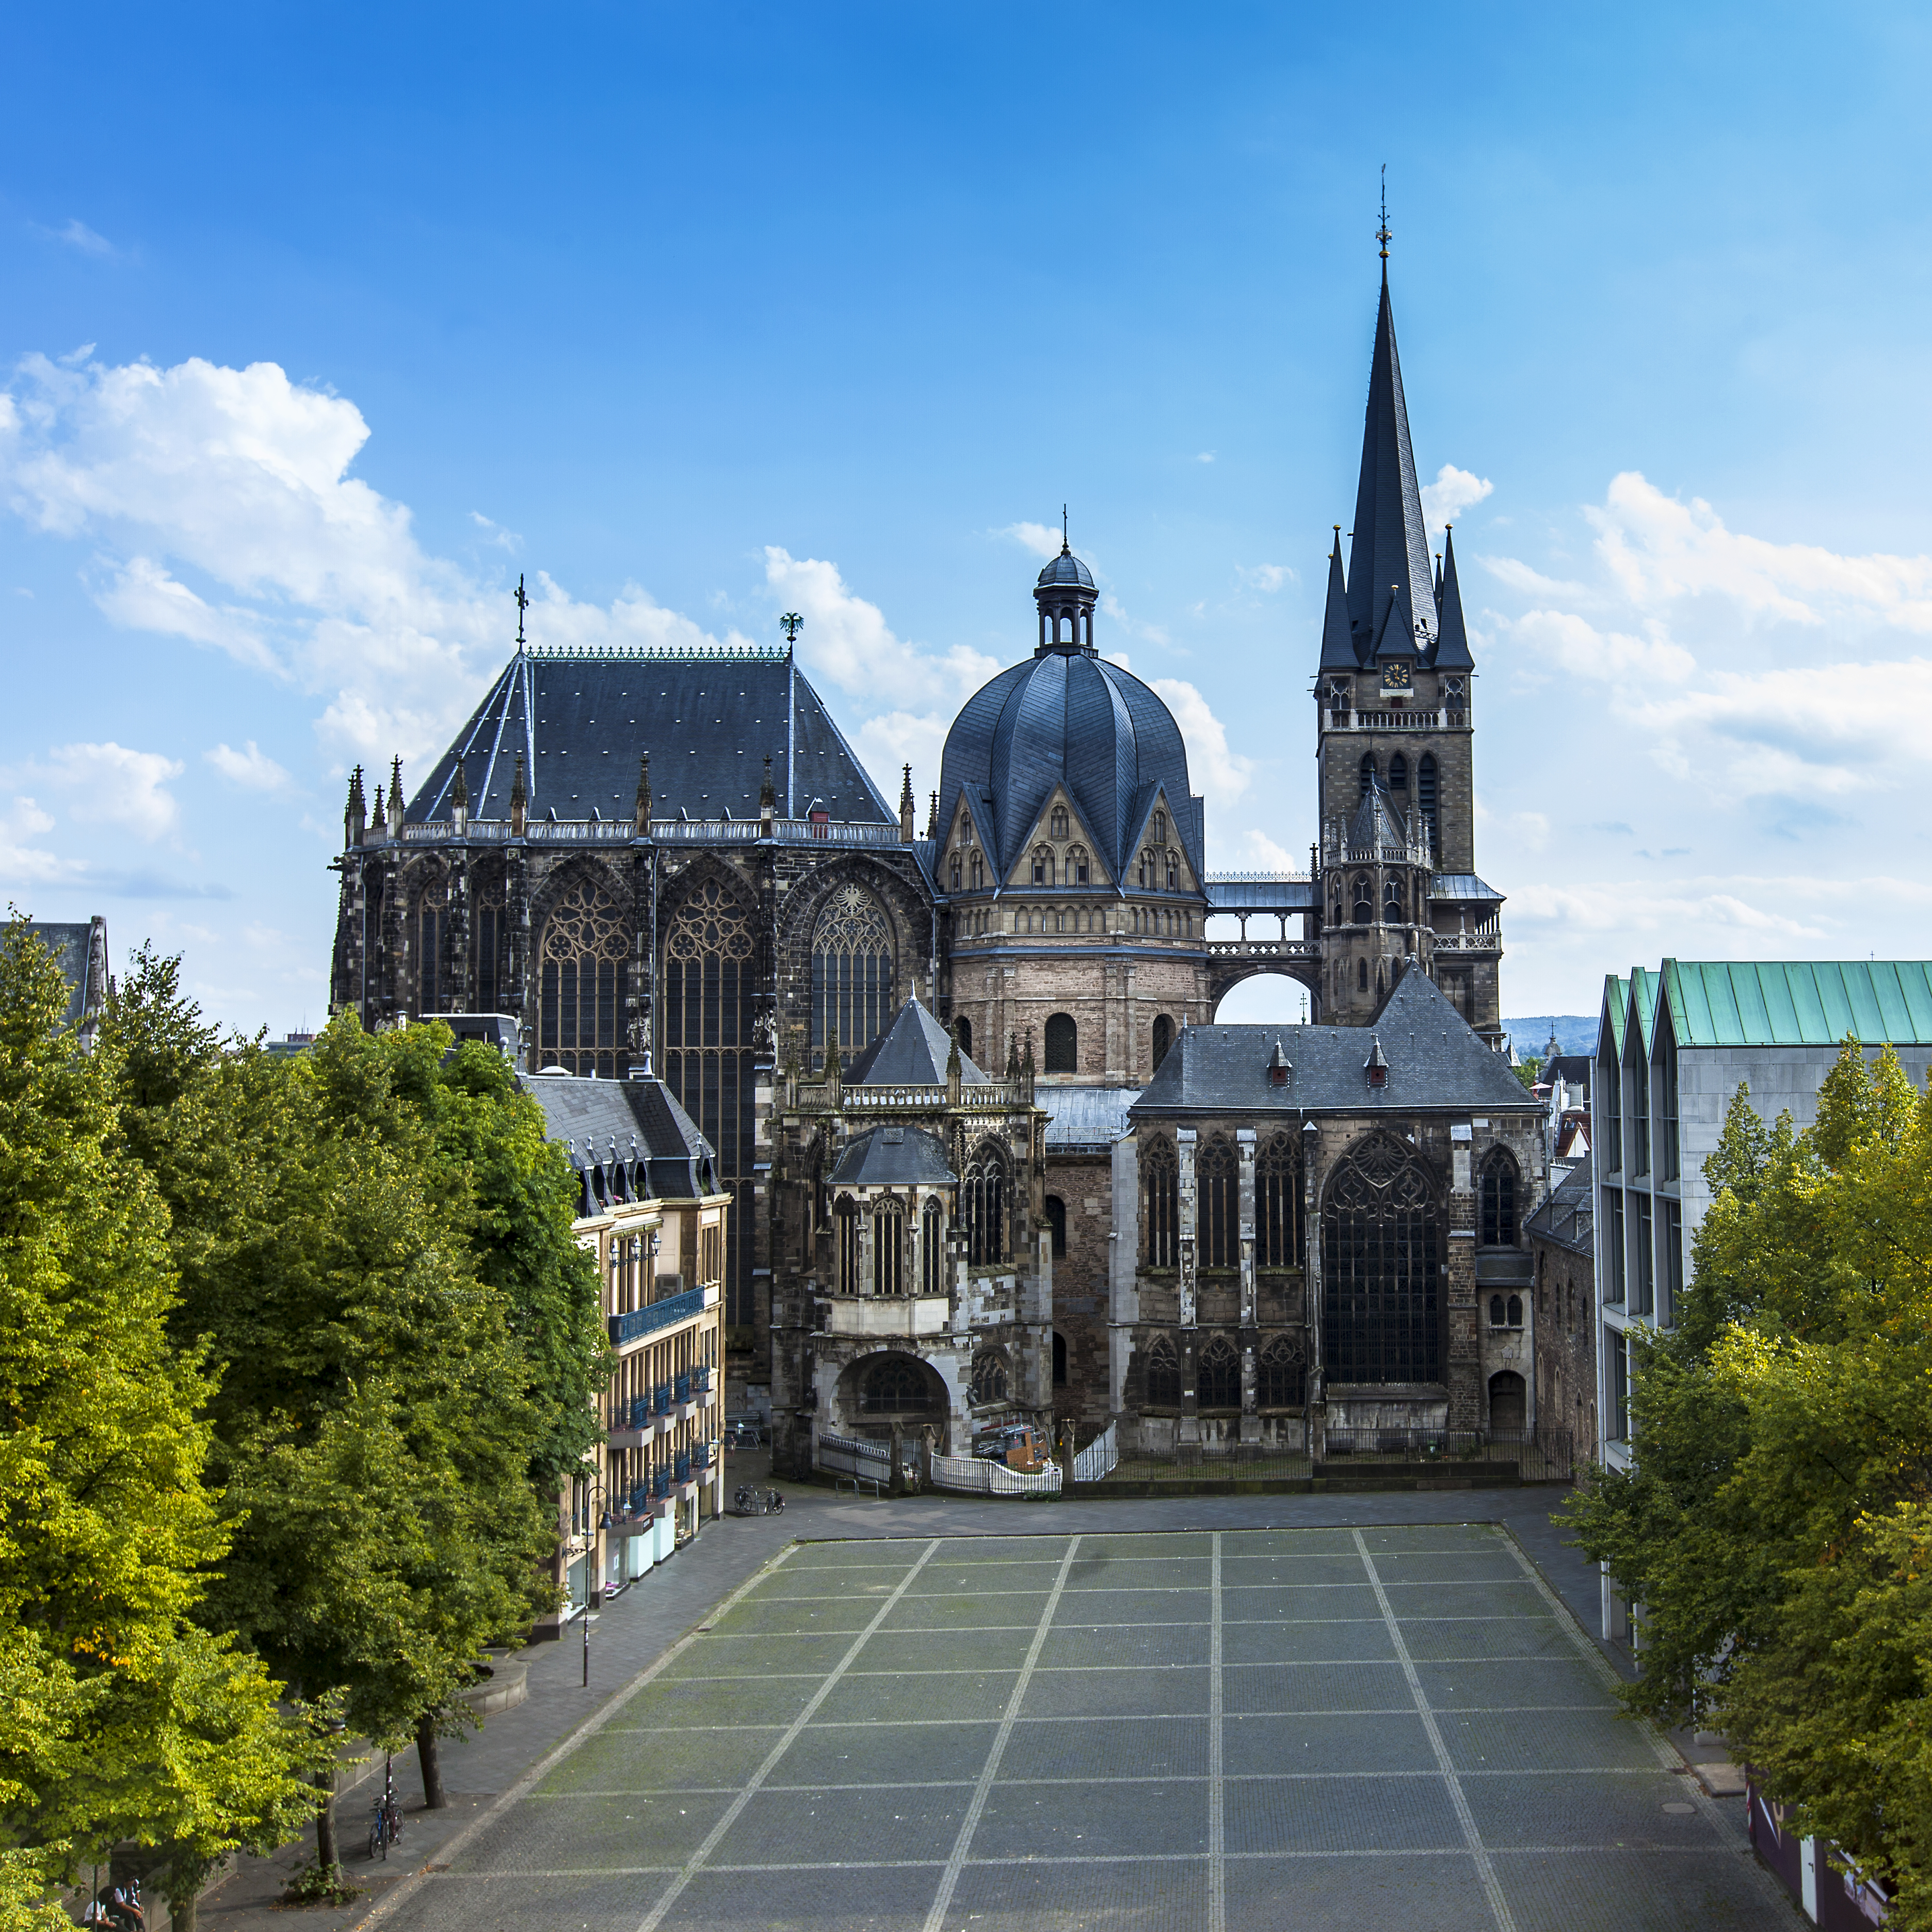 Aachen Cathedral in Germany. In 1978, the Aachen Cathedral was one of the first 12 items to be listed on the UNESCO list of world heritage sites.